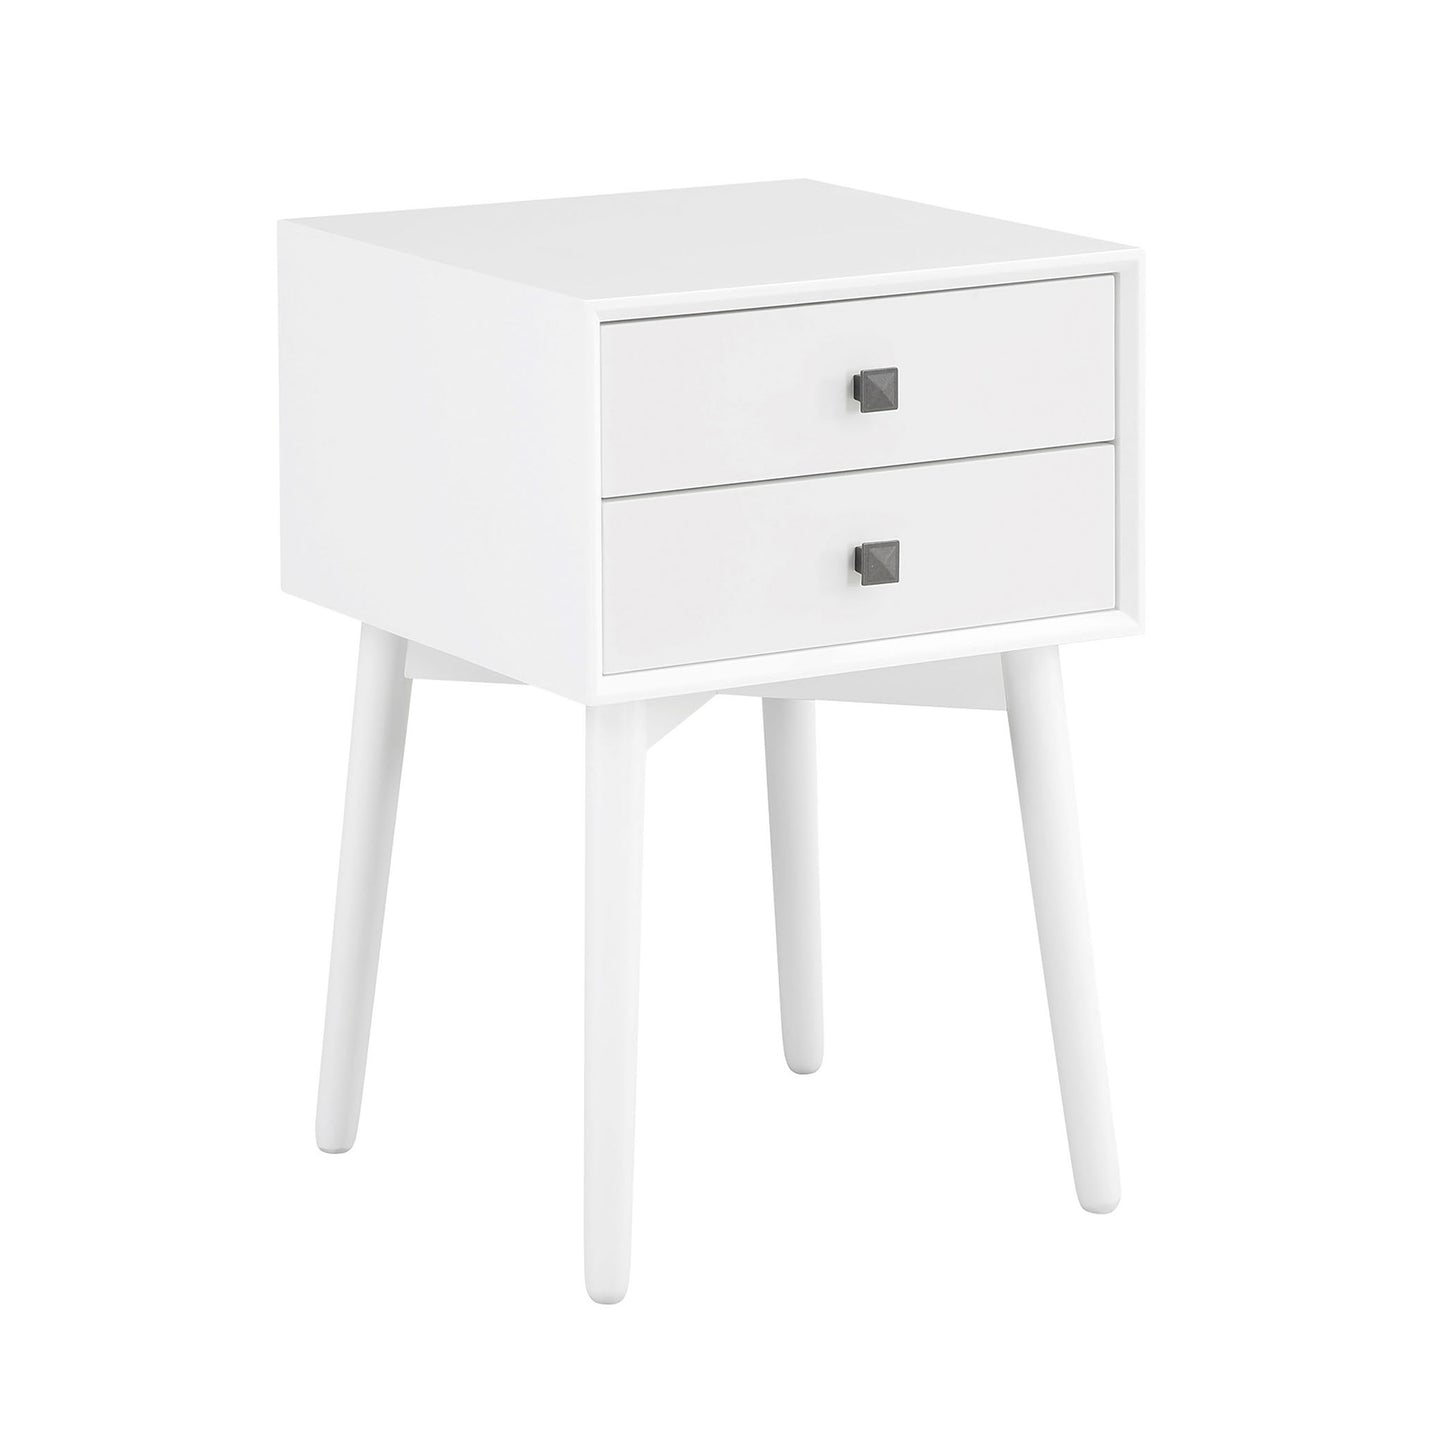 Right angled modern white two-drawer compact nightstand with splayed legs on a white background